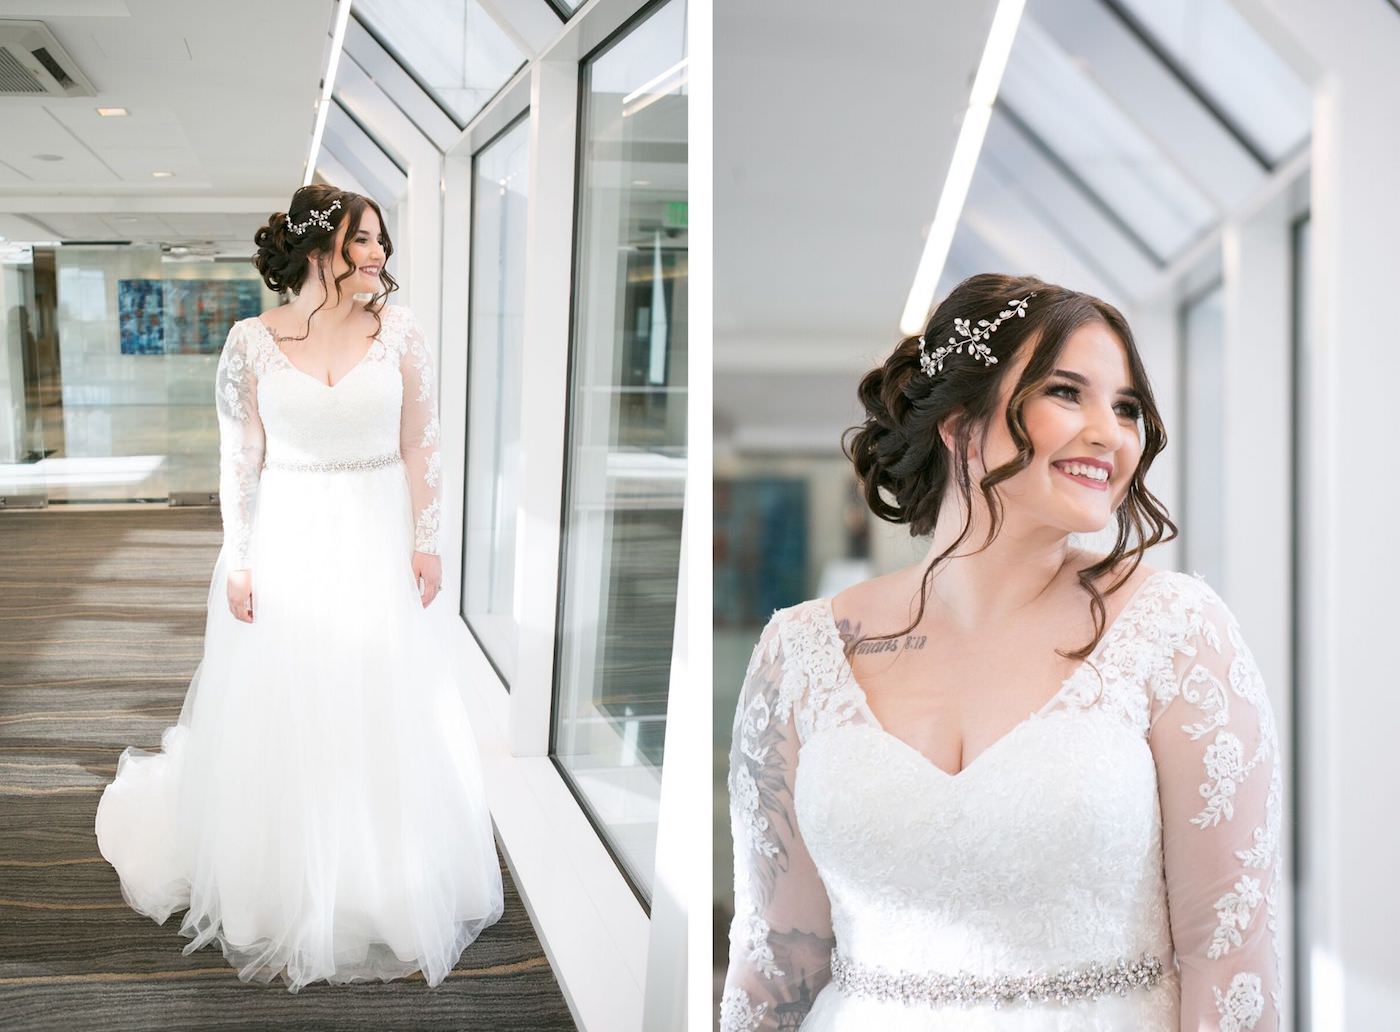 Tampa Bride Beauty Wedding Portrait in Long Sleeve Lace V Neckline Empire Waist and Tulle with Rhinestone Belt Wedding Dress, Romantic Curled Updo with Rhinestone Hair Clip | Wedding Photographer Carrie Wildes Photography | Wedding Hair and Makeup Michele Renee the Studio